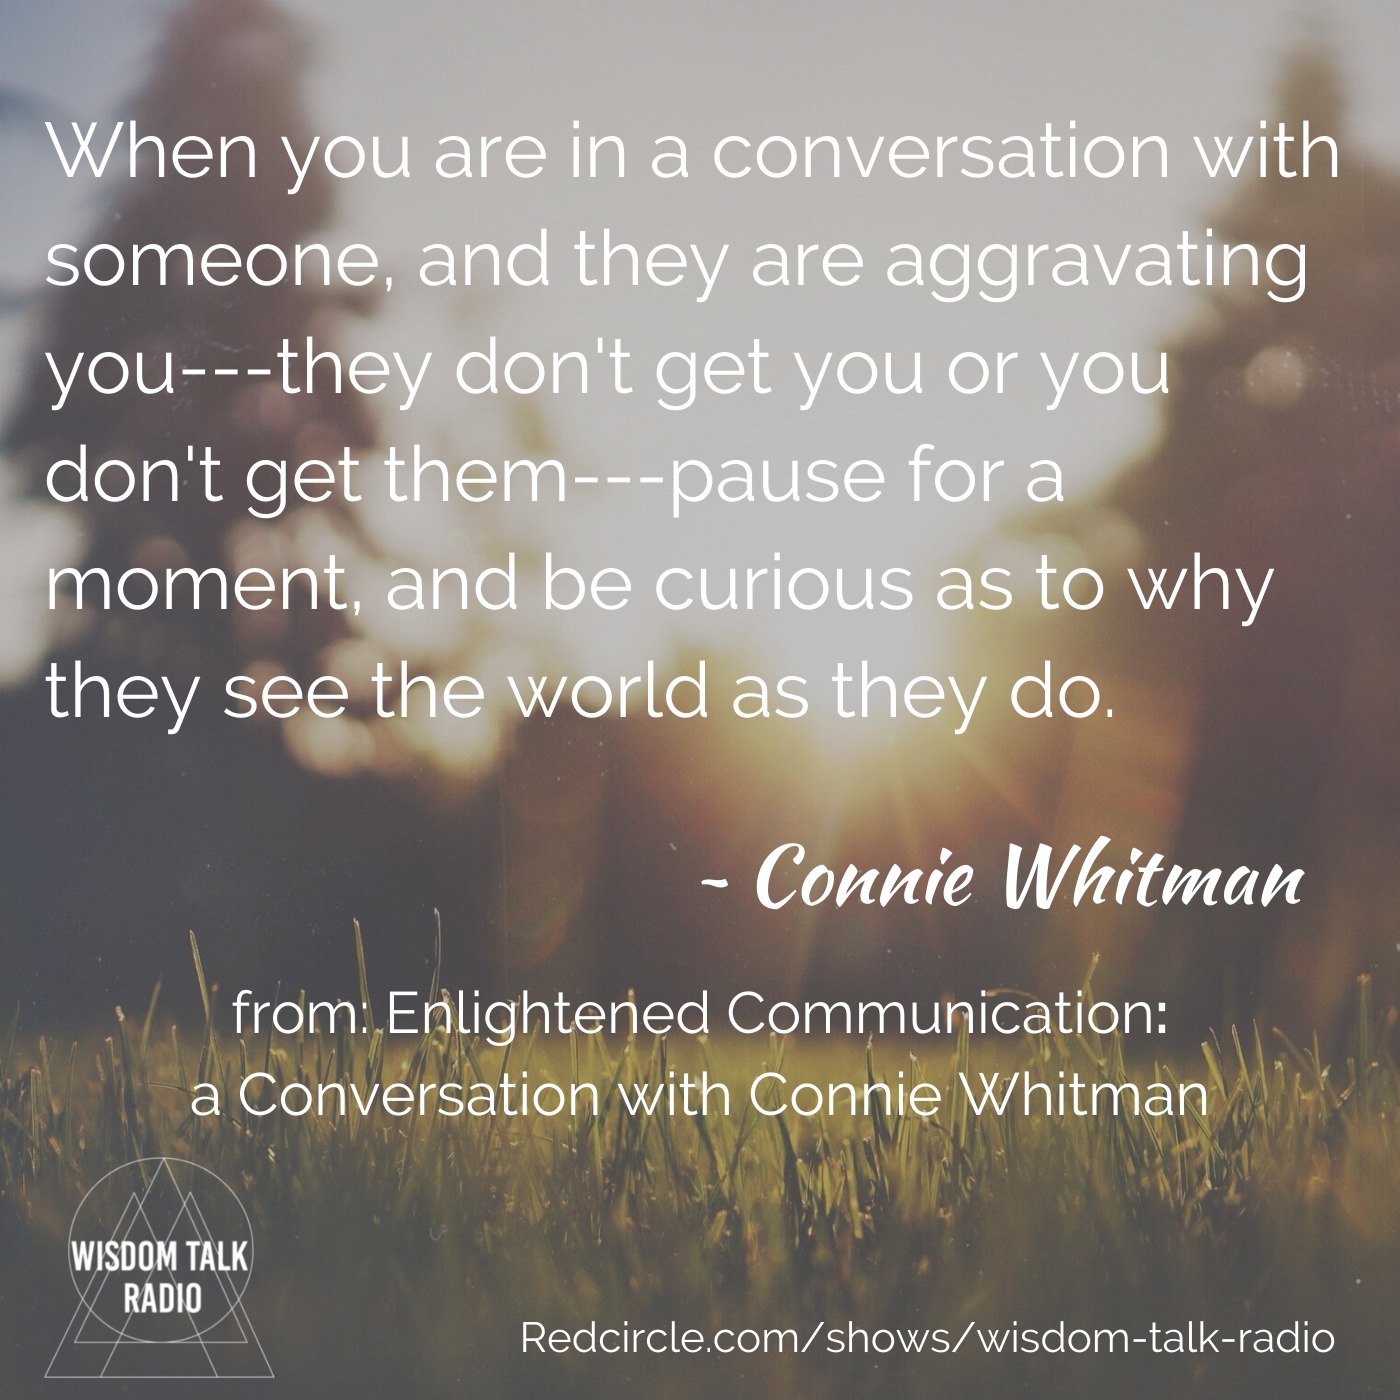 Enlightened Communication: a Conversation with Connie Whitman